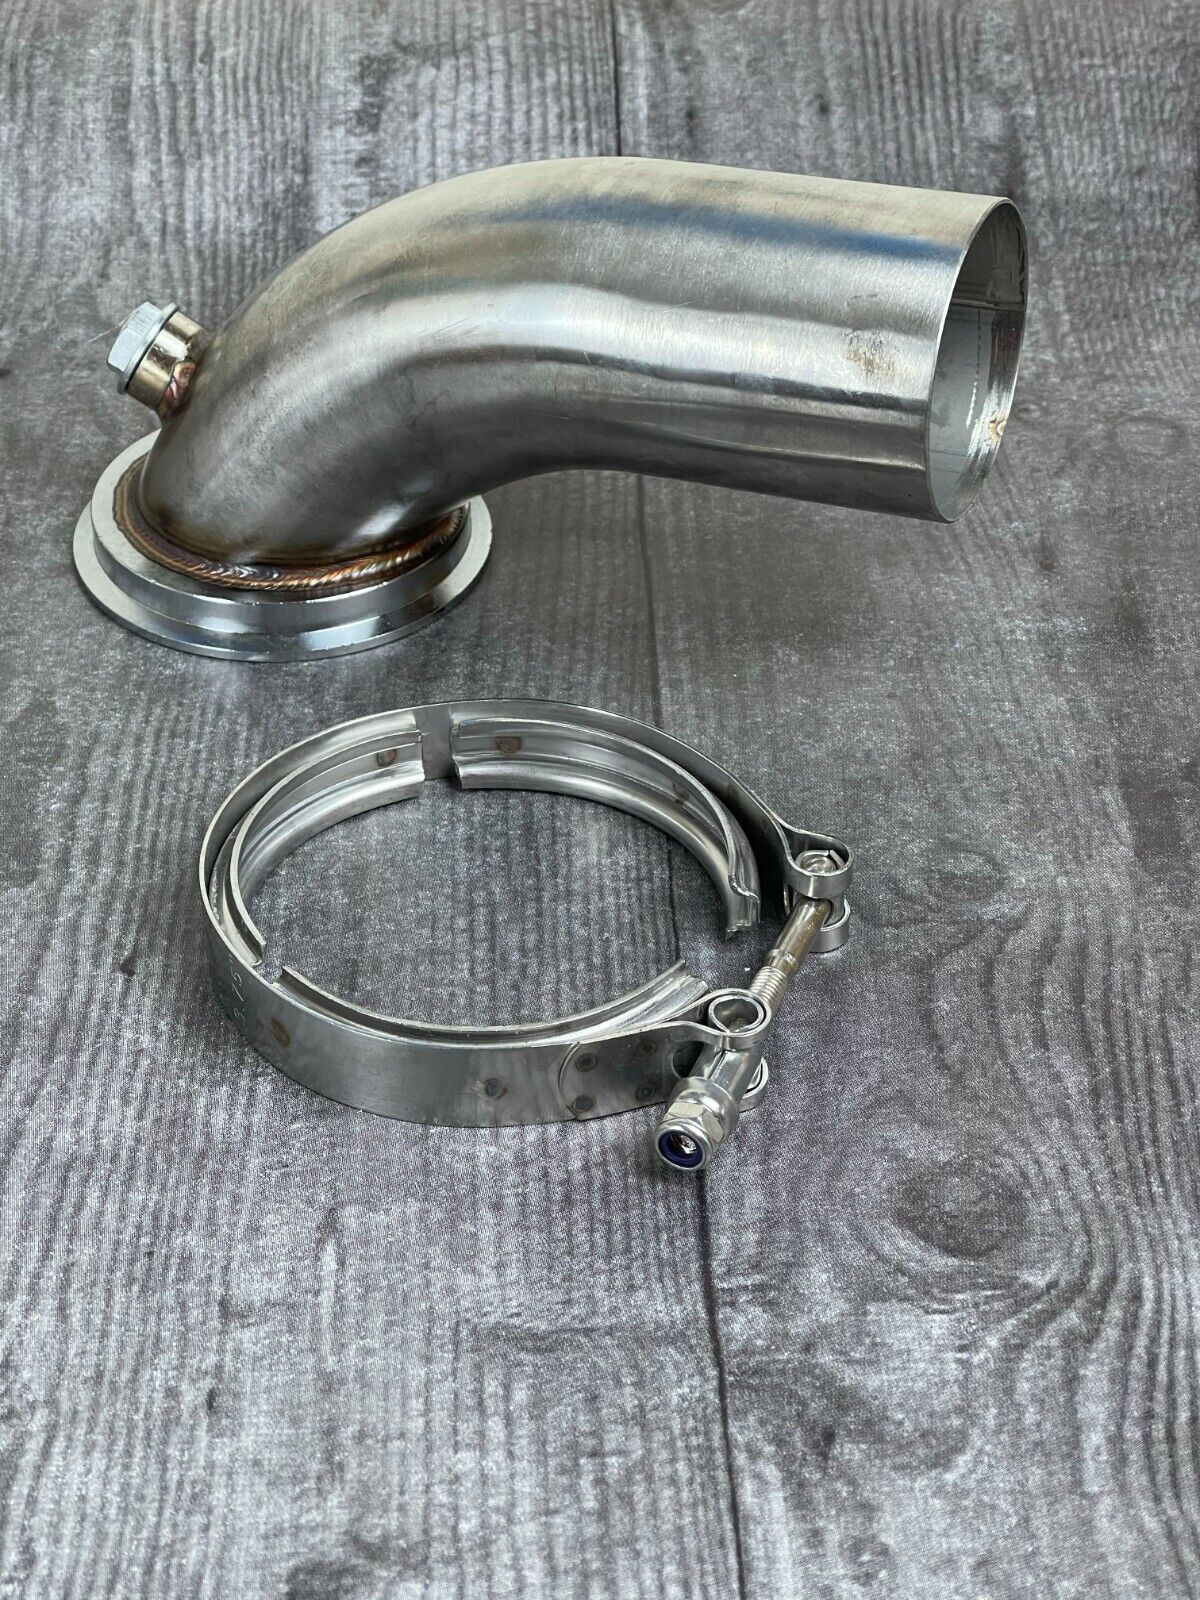 Stainless Downpipe Elbow 90° Holset Turbo HY35 HX HE351 V-band Flange Clamp